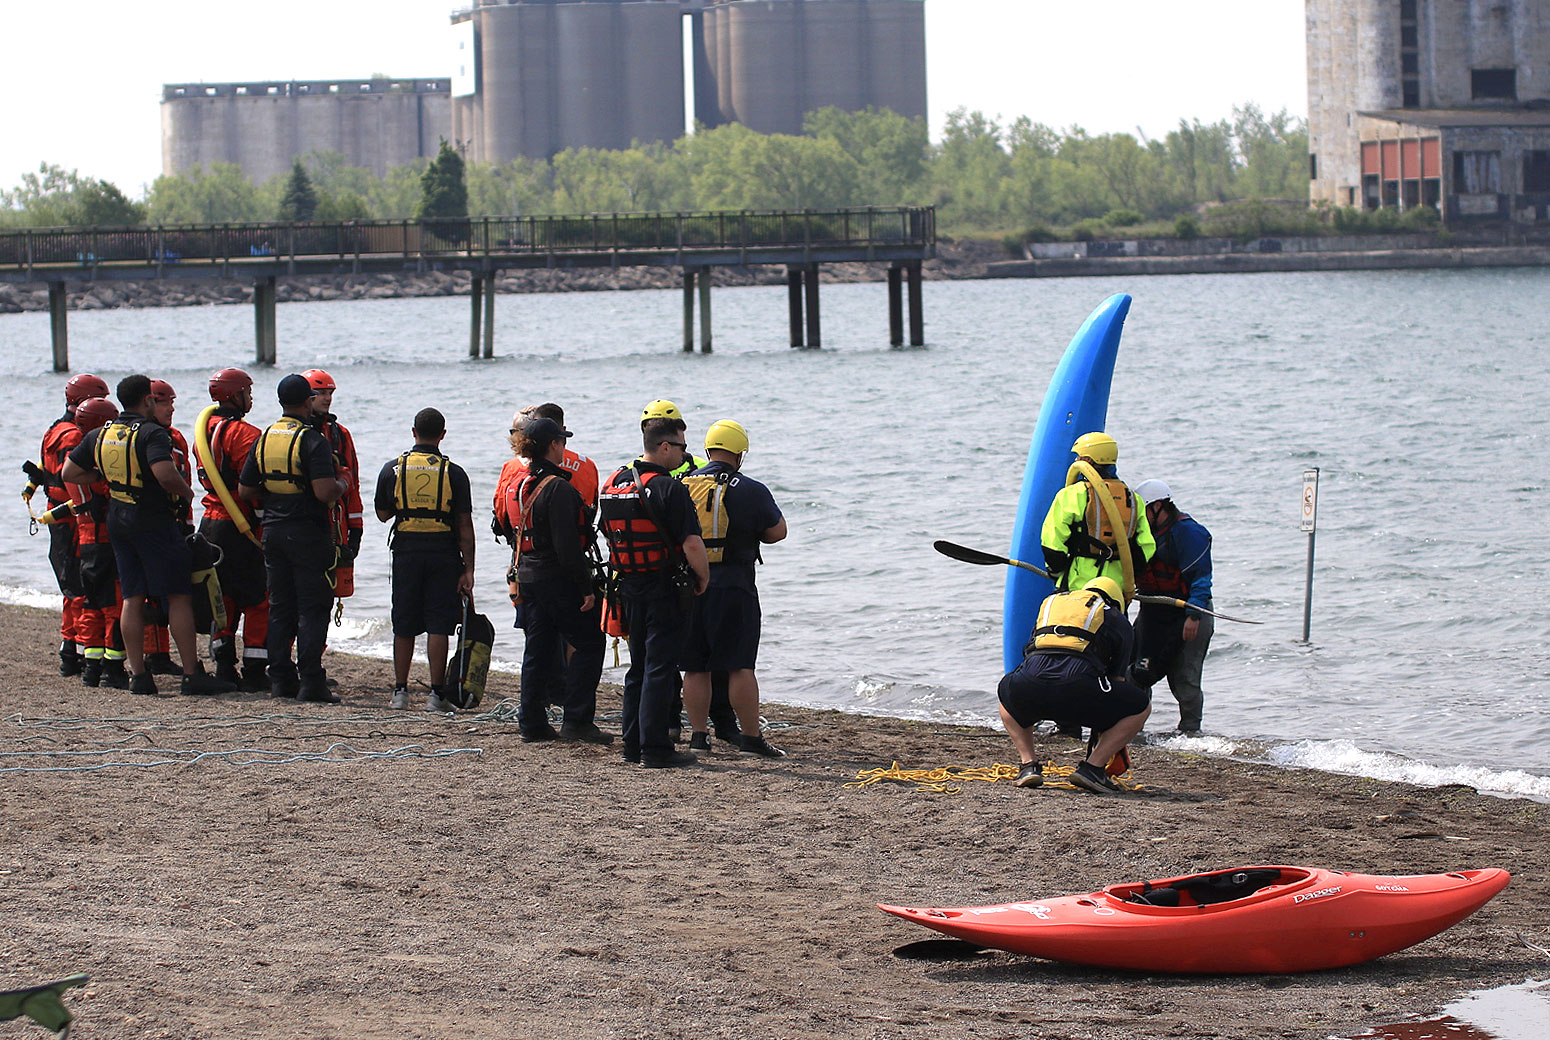 Water rescue team on the beach preparing kayaks for a rescue.